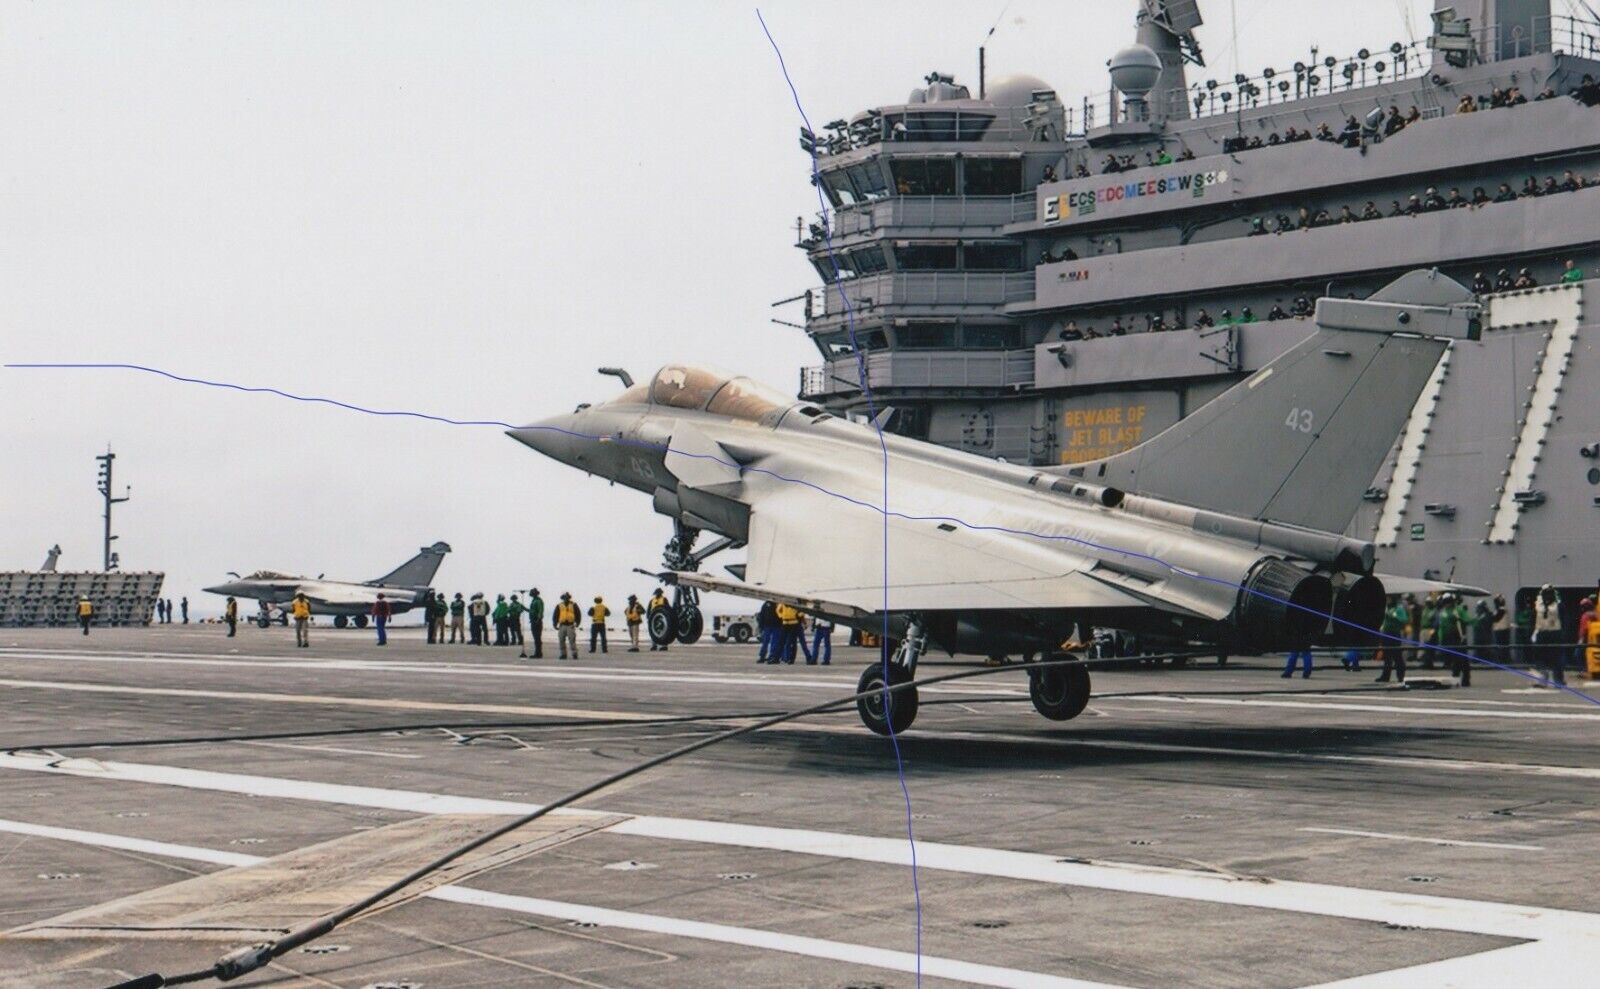  MILITARY AIRCRAFT PLANE PHOTO FRENCH MARINE PHOTOGRAPH RAFALE JET ON US CARRIER